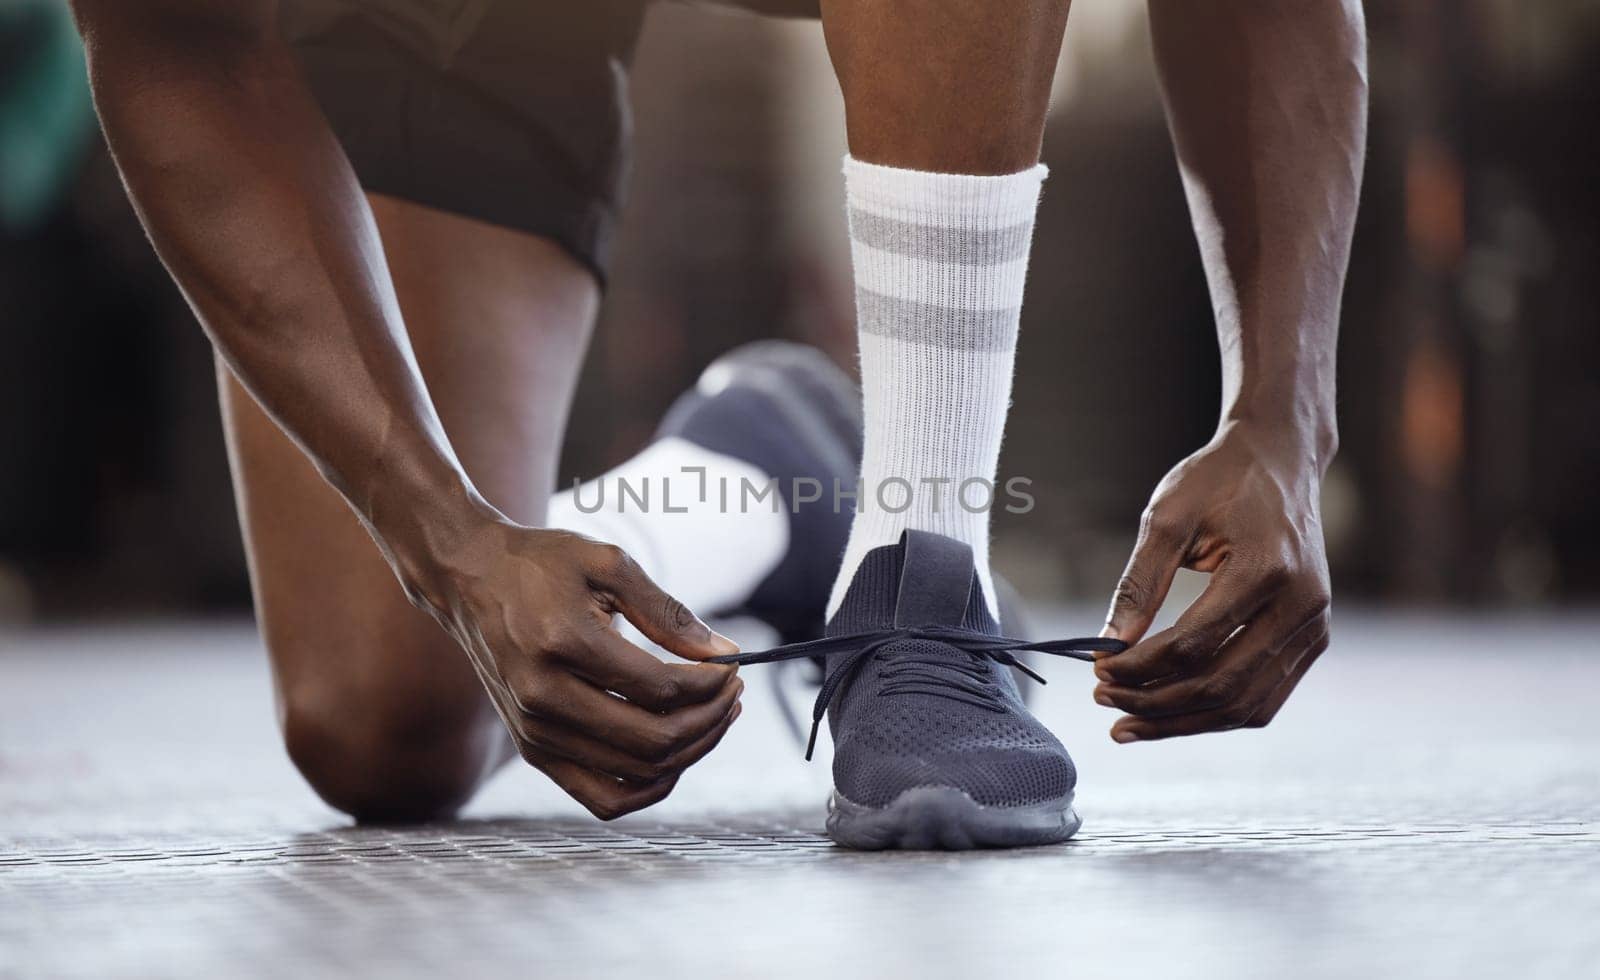 Tie, fitness and hands on shoes at gym for workout, training or exercise or runner ready to start exercising. Black man, goals and tie running shoes in sports performance, health practice or class.